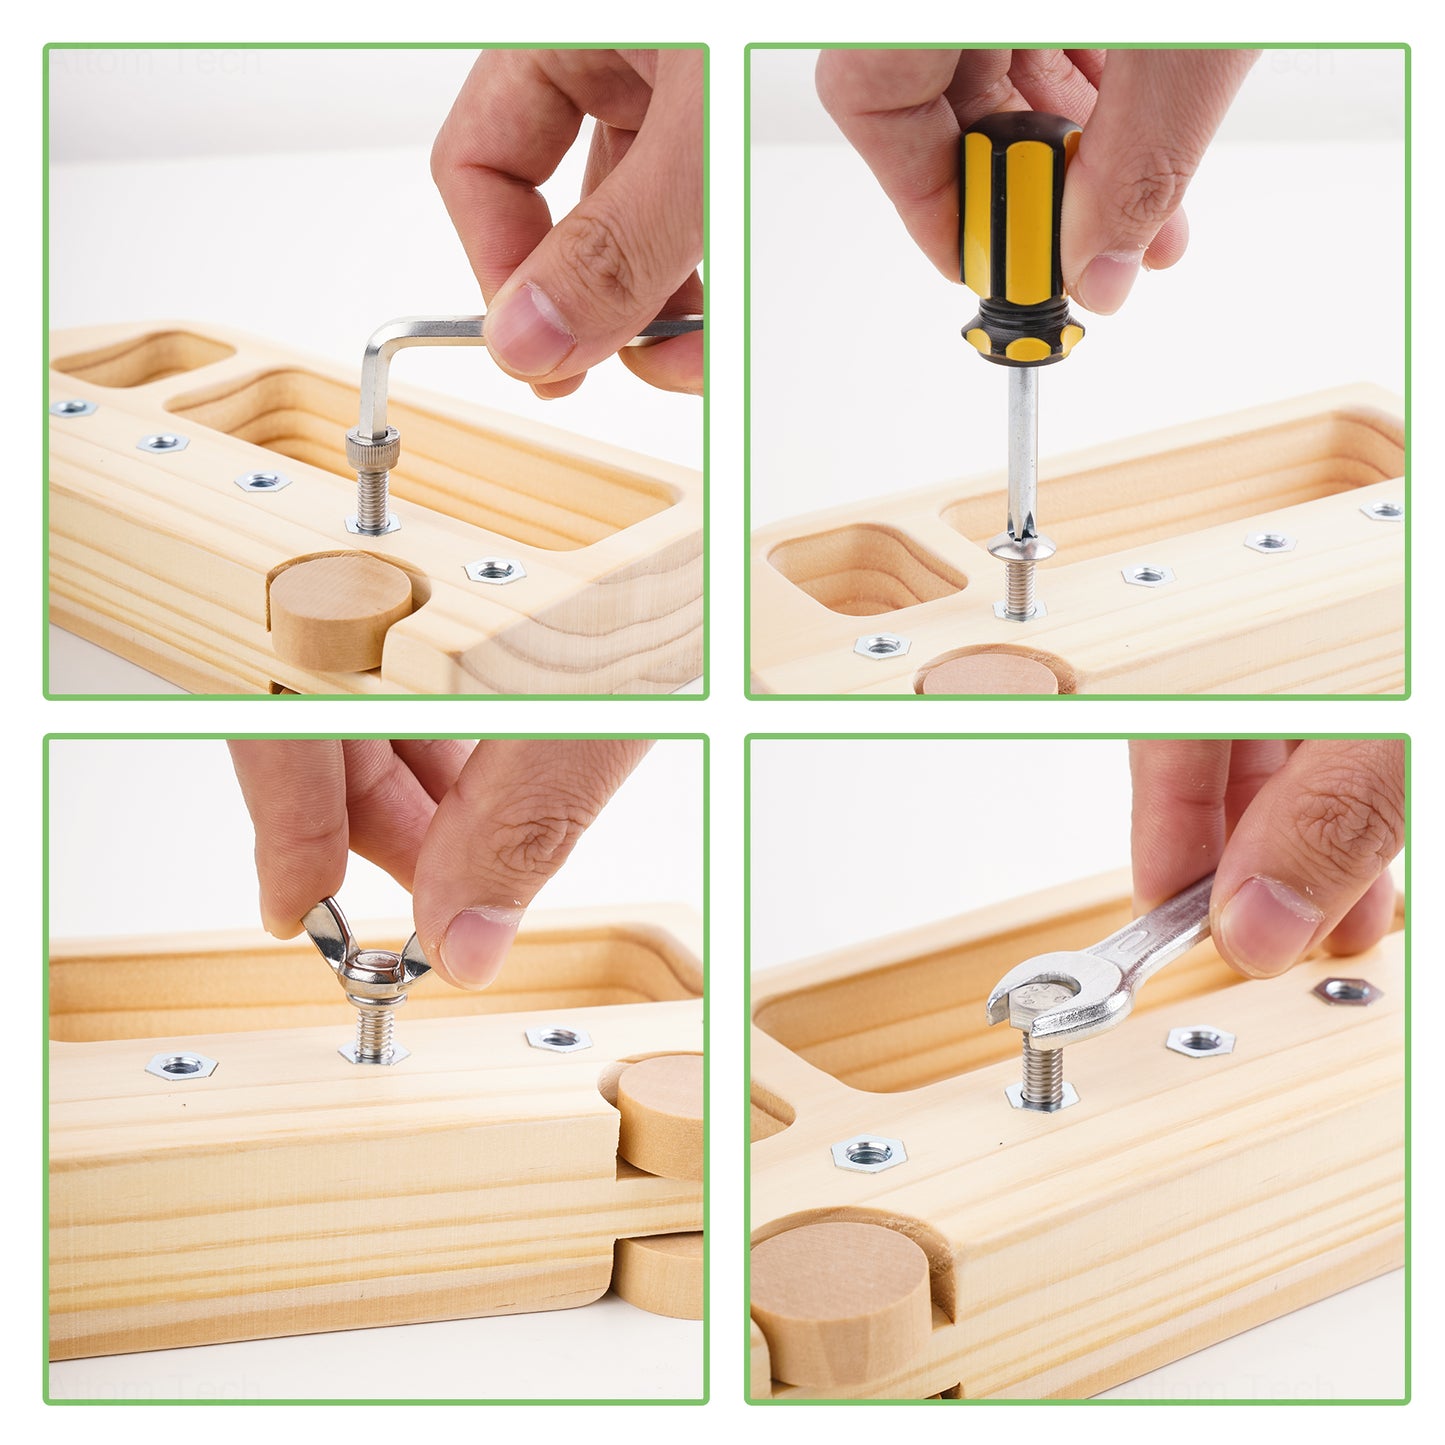 Montessori Wooden Screwdriver Board Sensory Toy for Kids 3+ Years